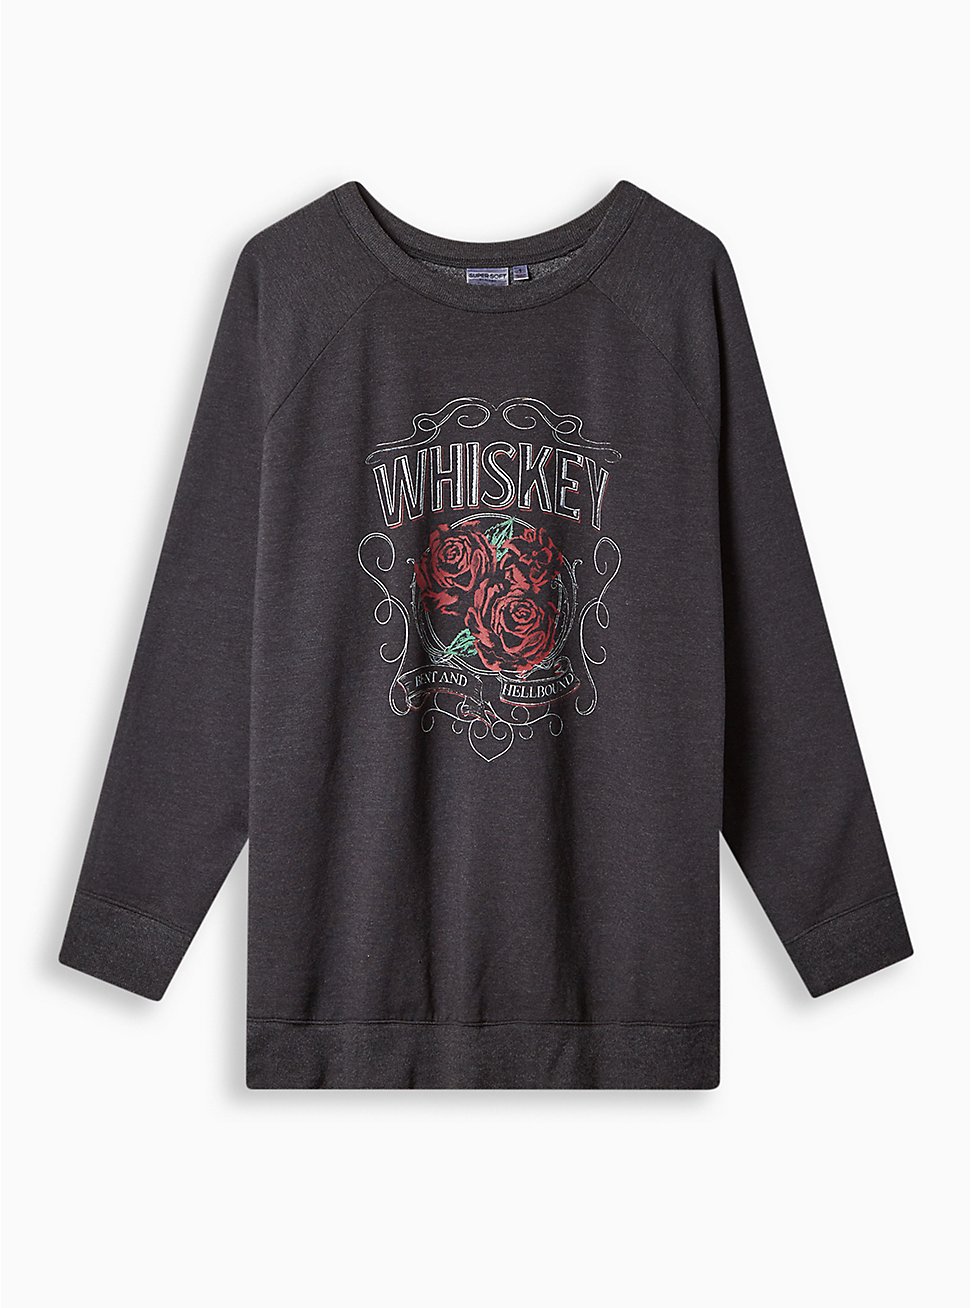 Whiskey Rose Relaxed Fit Super Soft Fleece Crew Neck Tunic , DEEP BLACK, hi-res